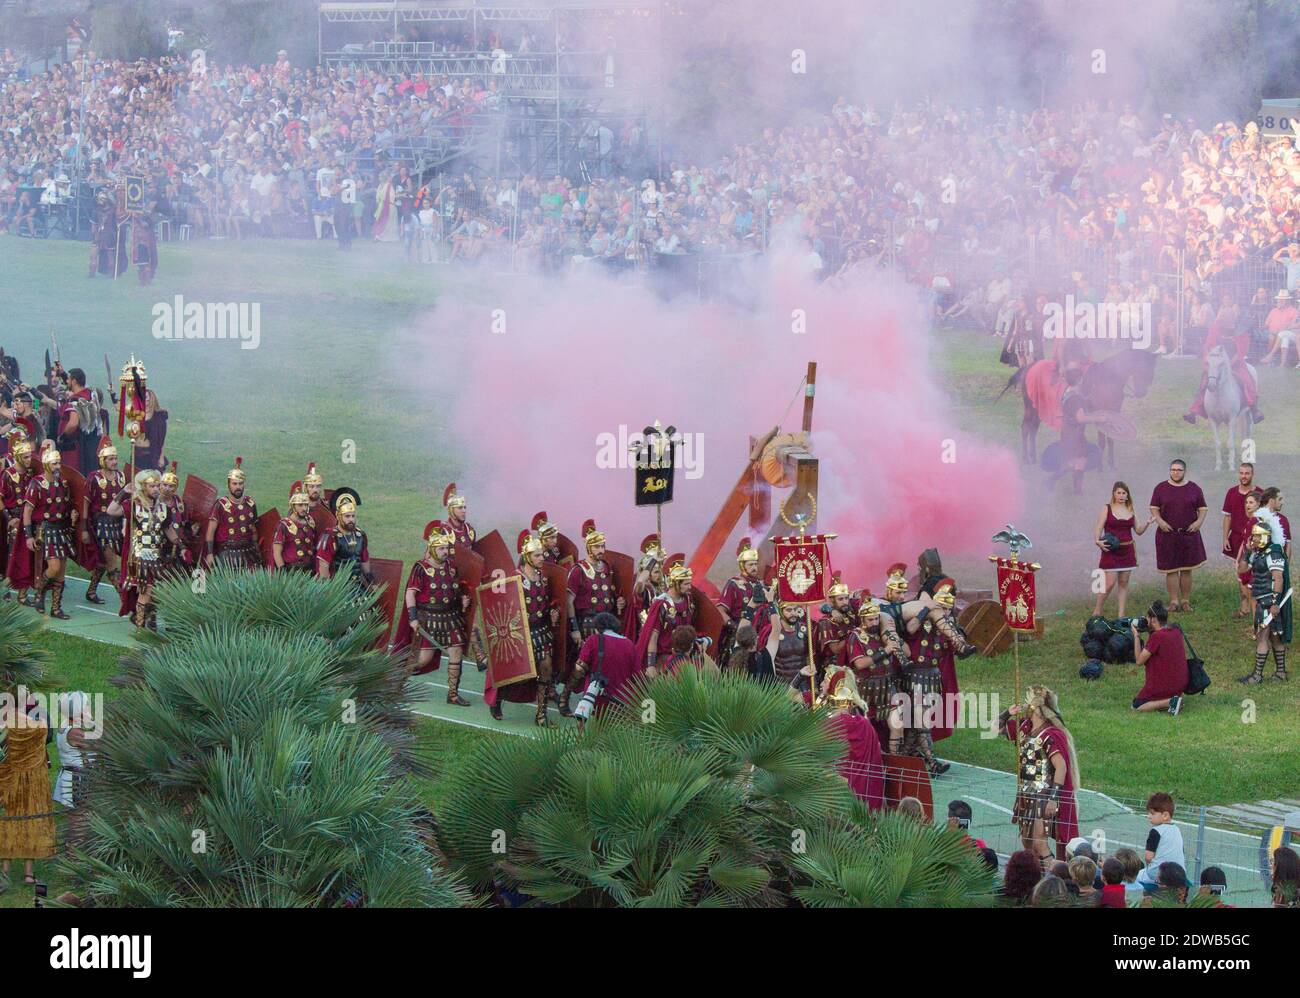 Annual festival in Cartagena, Spain is the Cartaginians and Romans. Hidden by smoke a wounded warrior is carried from the battlefield. Many onlookers. Stock Photo